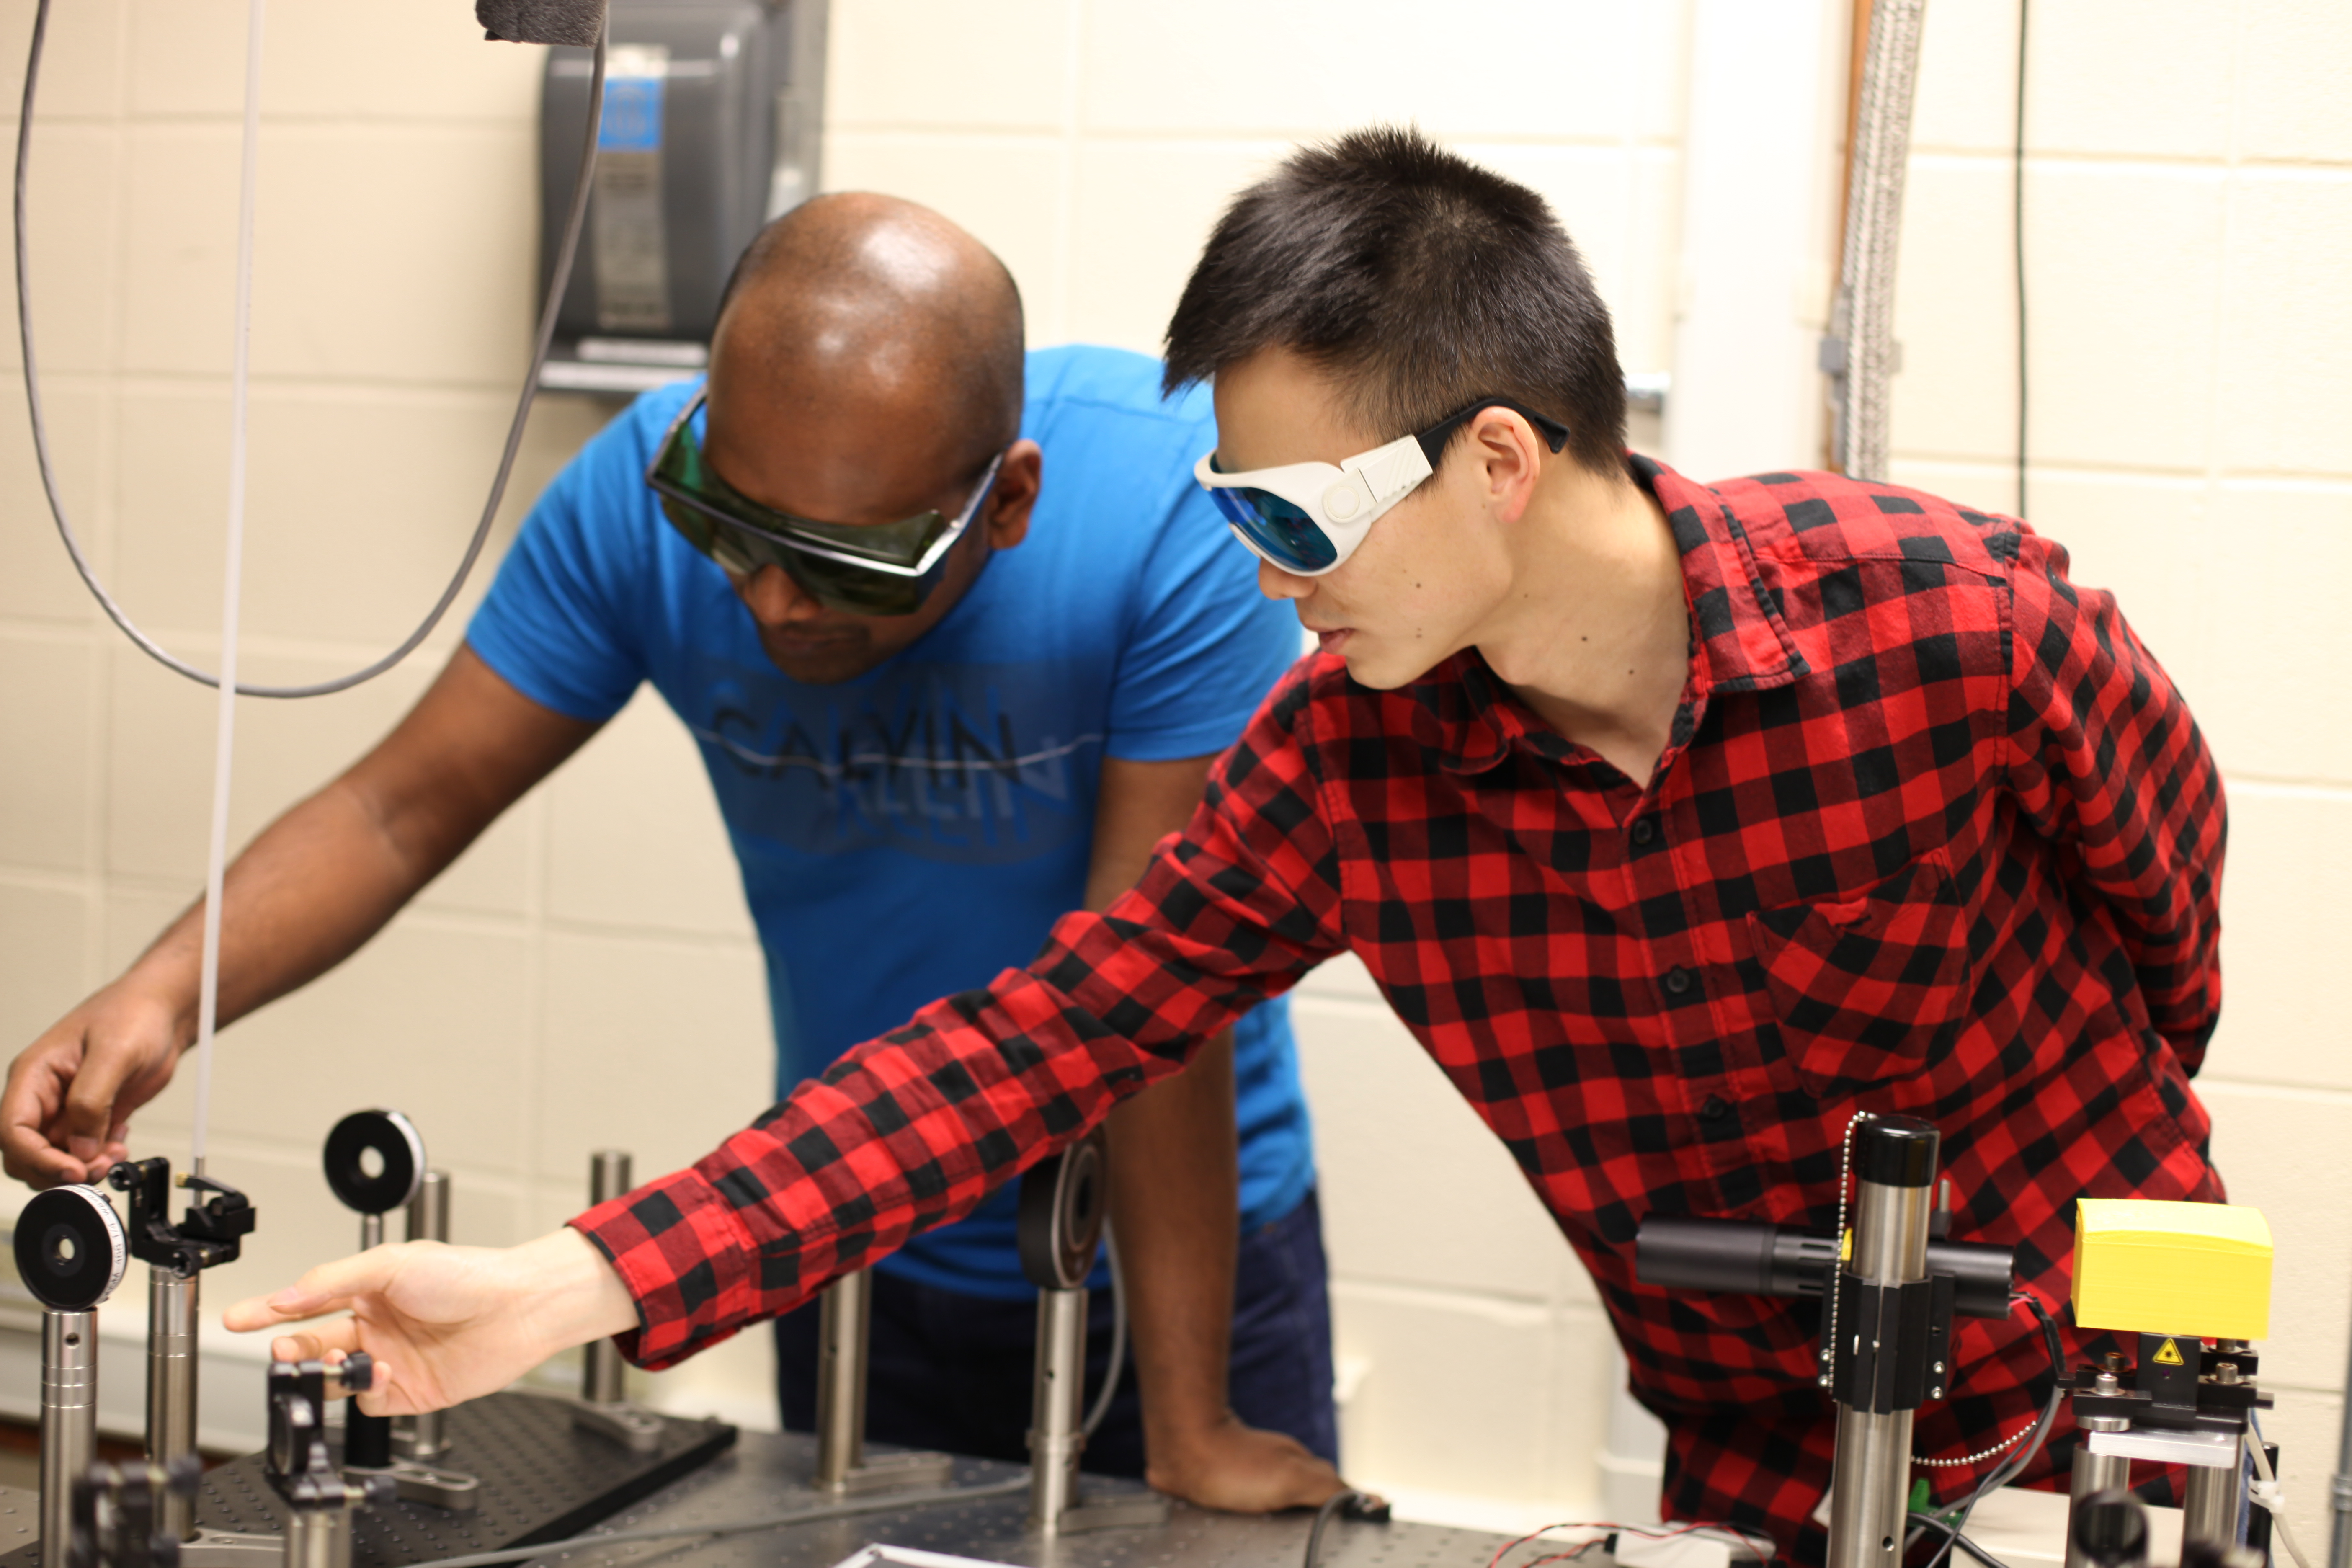 SD Mines students Ishara Ratnayake and Lin Kang work with Smith to develop laser physics technologies.